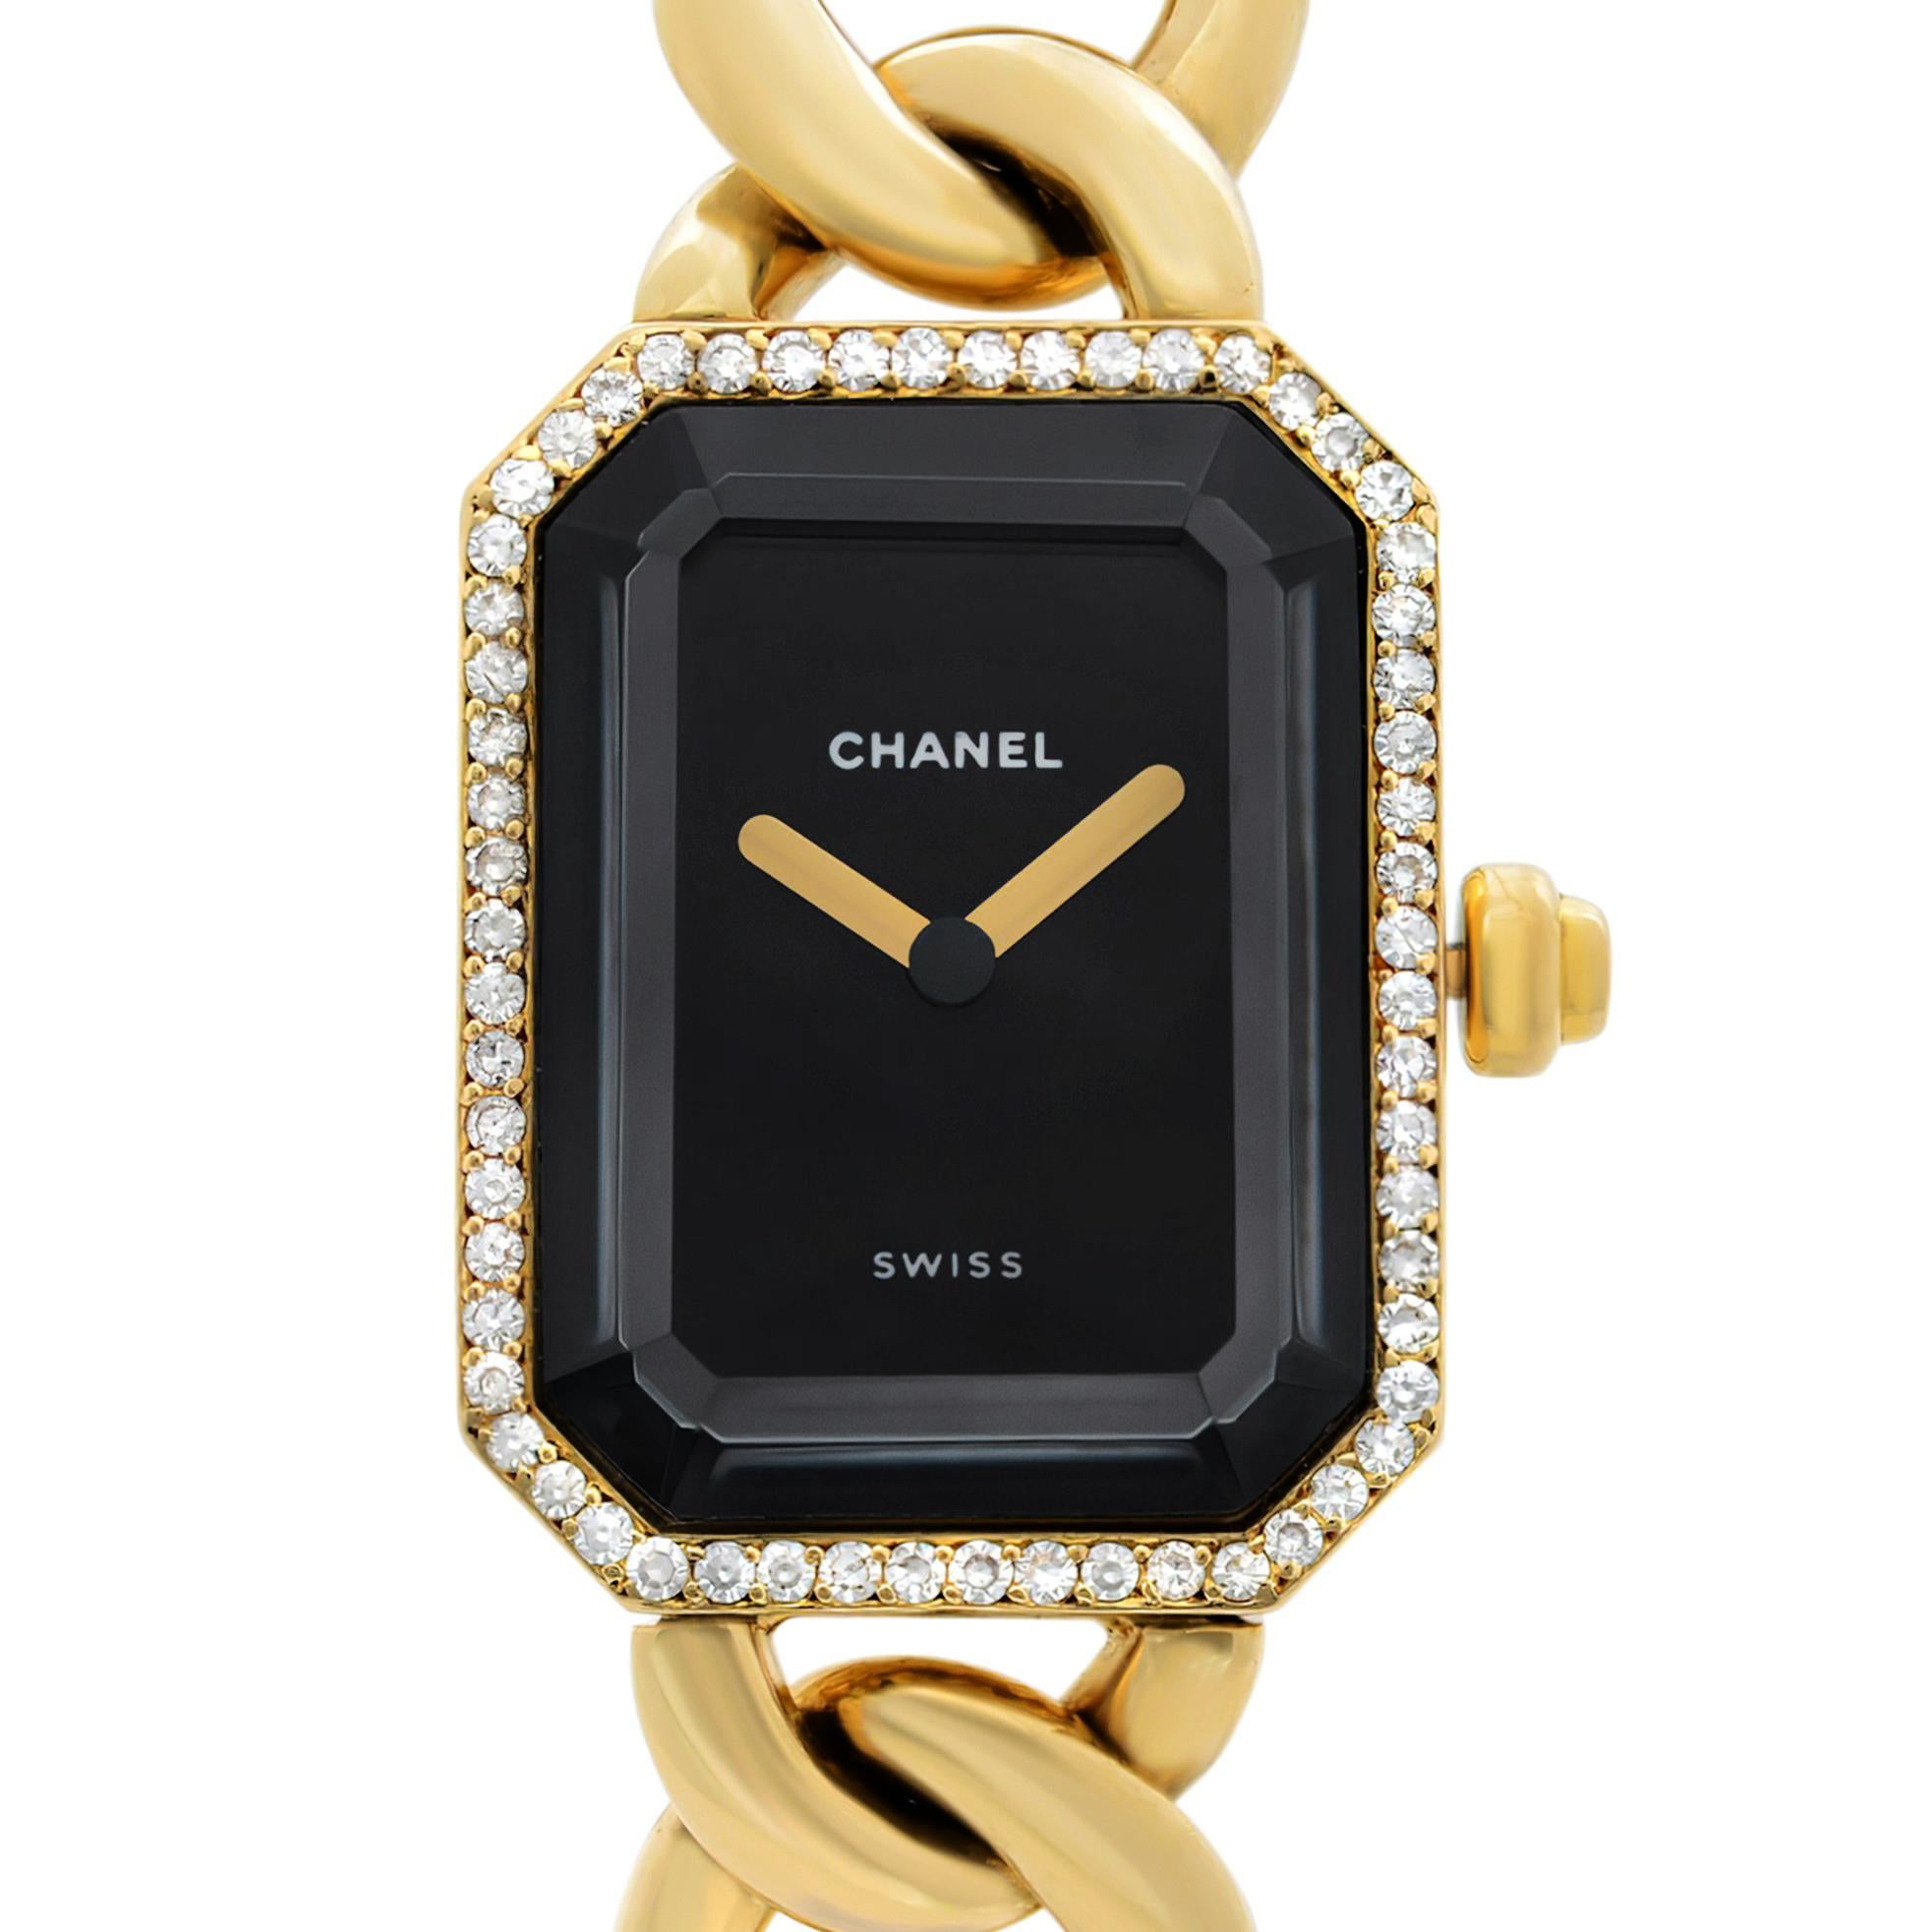 Display Model Chanel H3258 Premiere 18k Yellow Gold Diamond Black Dial Quartz Ladies Watch. This Beautiful Timepiece Features: 18k Yellow Gold Case with an 18k Yellow Gold Bracelet, Fixed Diamonds Bezel, Black Lacquered Dial with Gold-Tone Hands. No